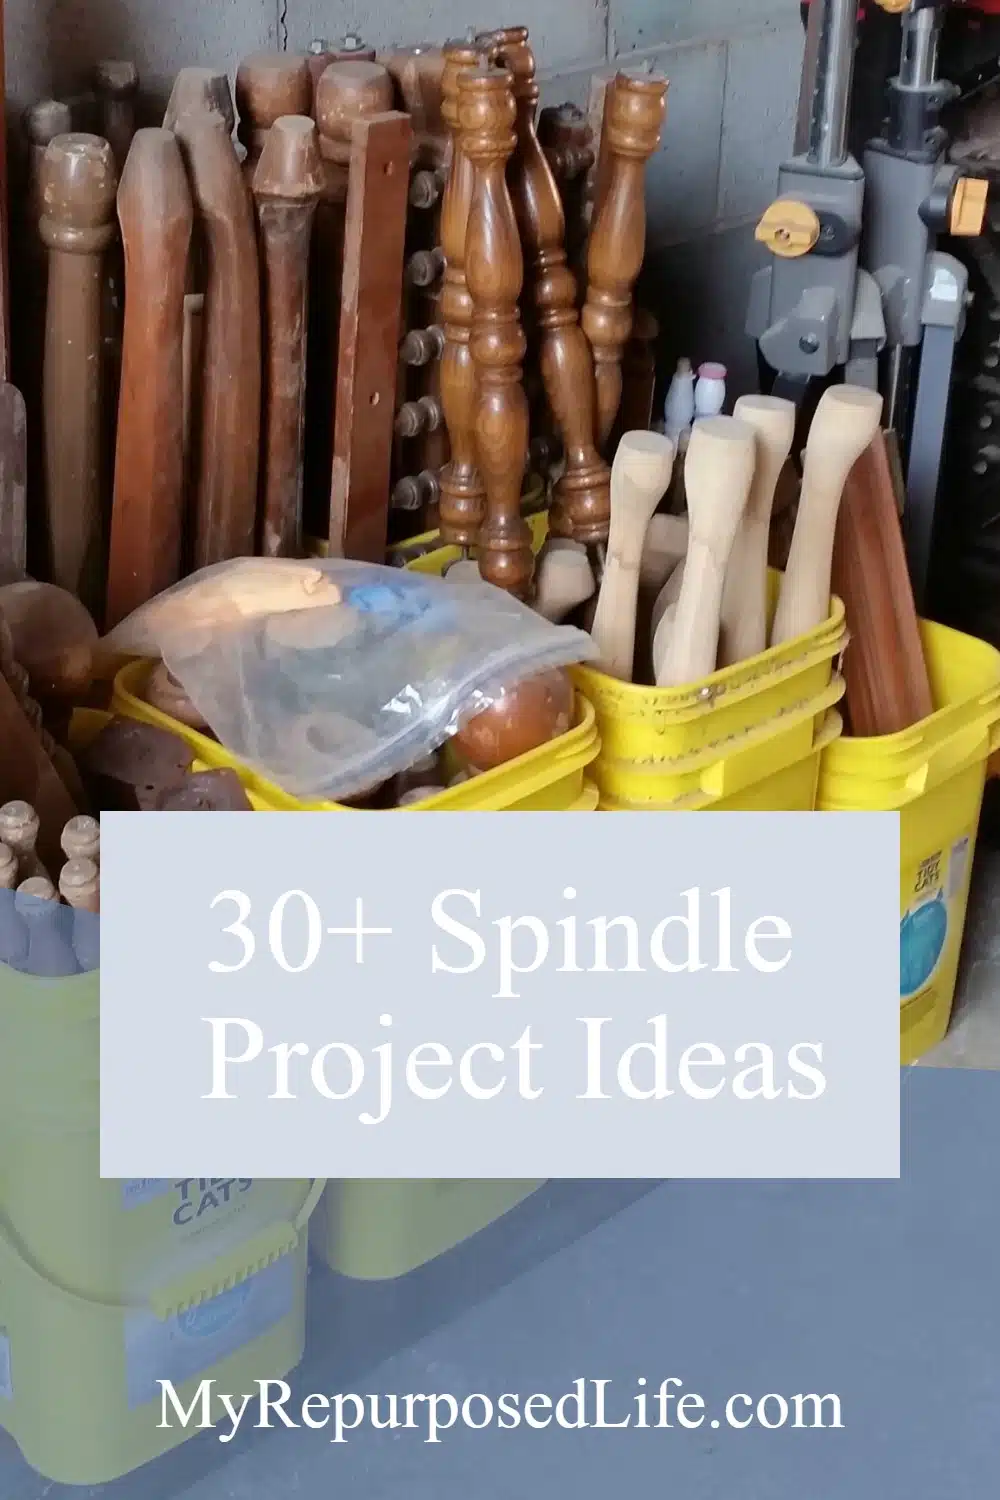 This large collection of wooden spindle projects will have your head spinning wondering just what you will make first! So many spindles so little time. #MyRepurposedLife #repurposed #woodenspindle #spindle #diy #project #roundup via @repurposedlife